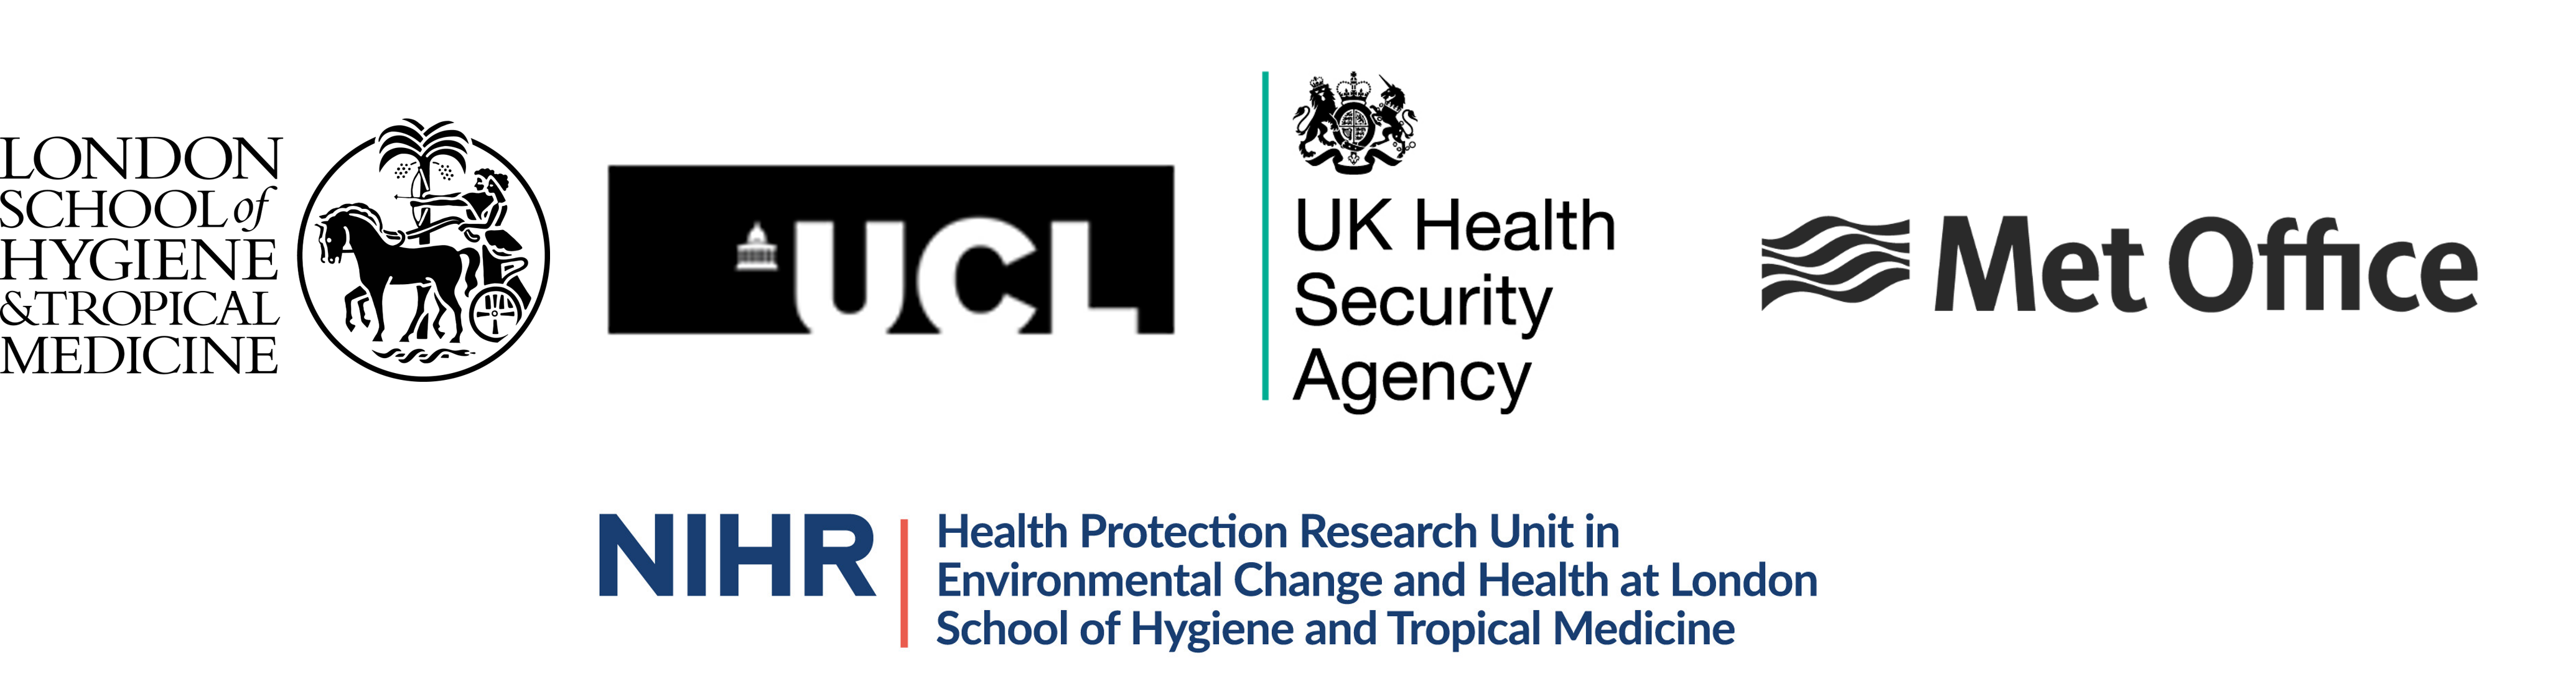 Collaborators logo - LSHTM, UCL, UK Health Security Agency, Met Office and NIHR Health Protection Research Unit in Environmental Change and Health at London School of Hygiene & Tropical Medicine